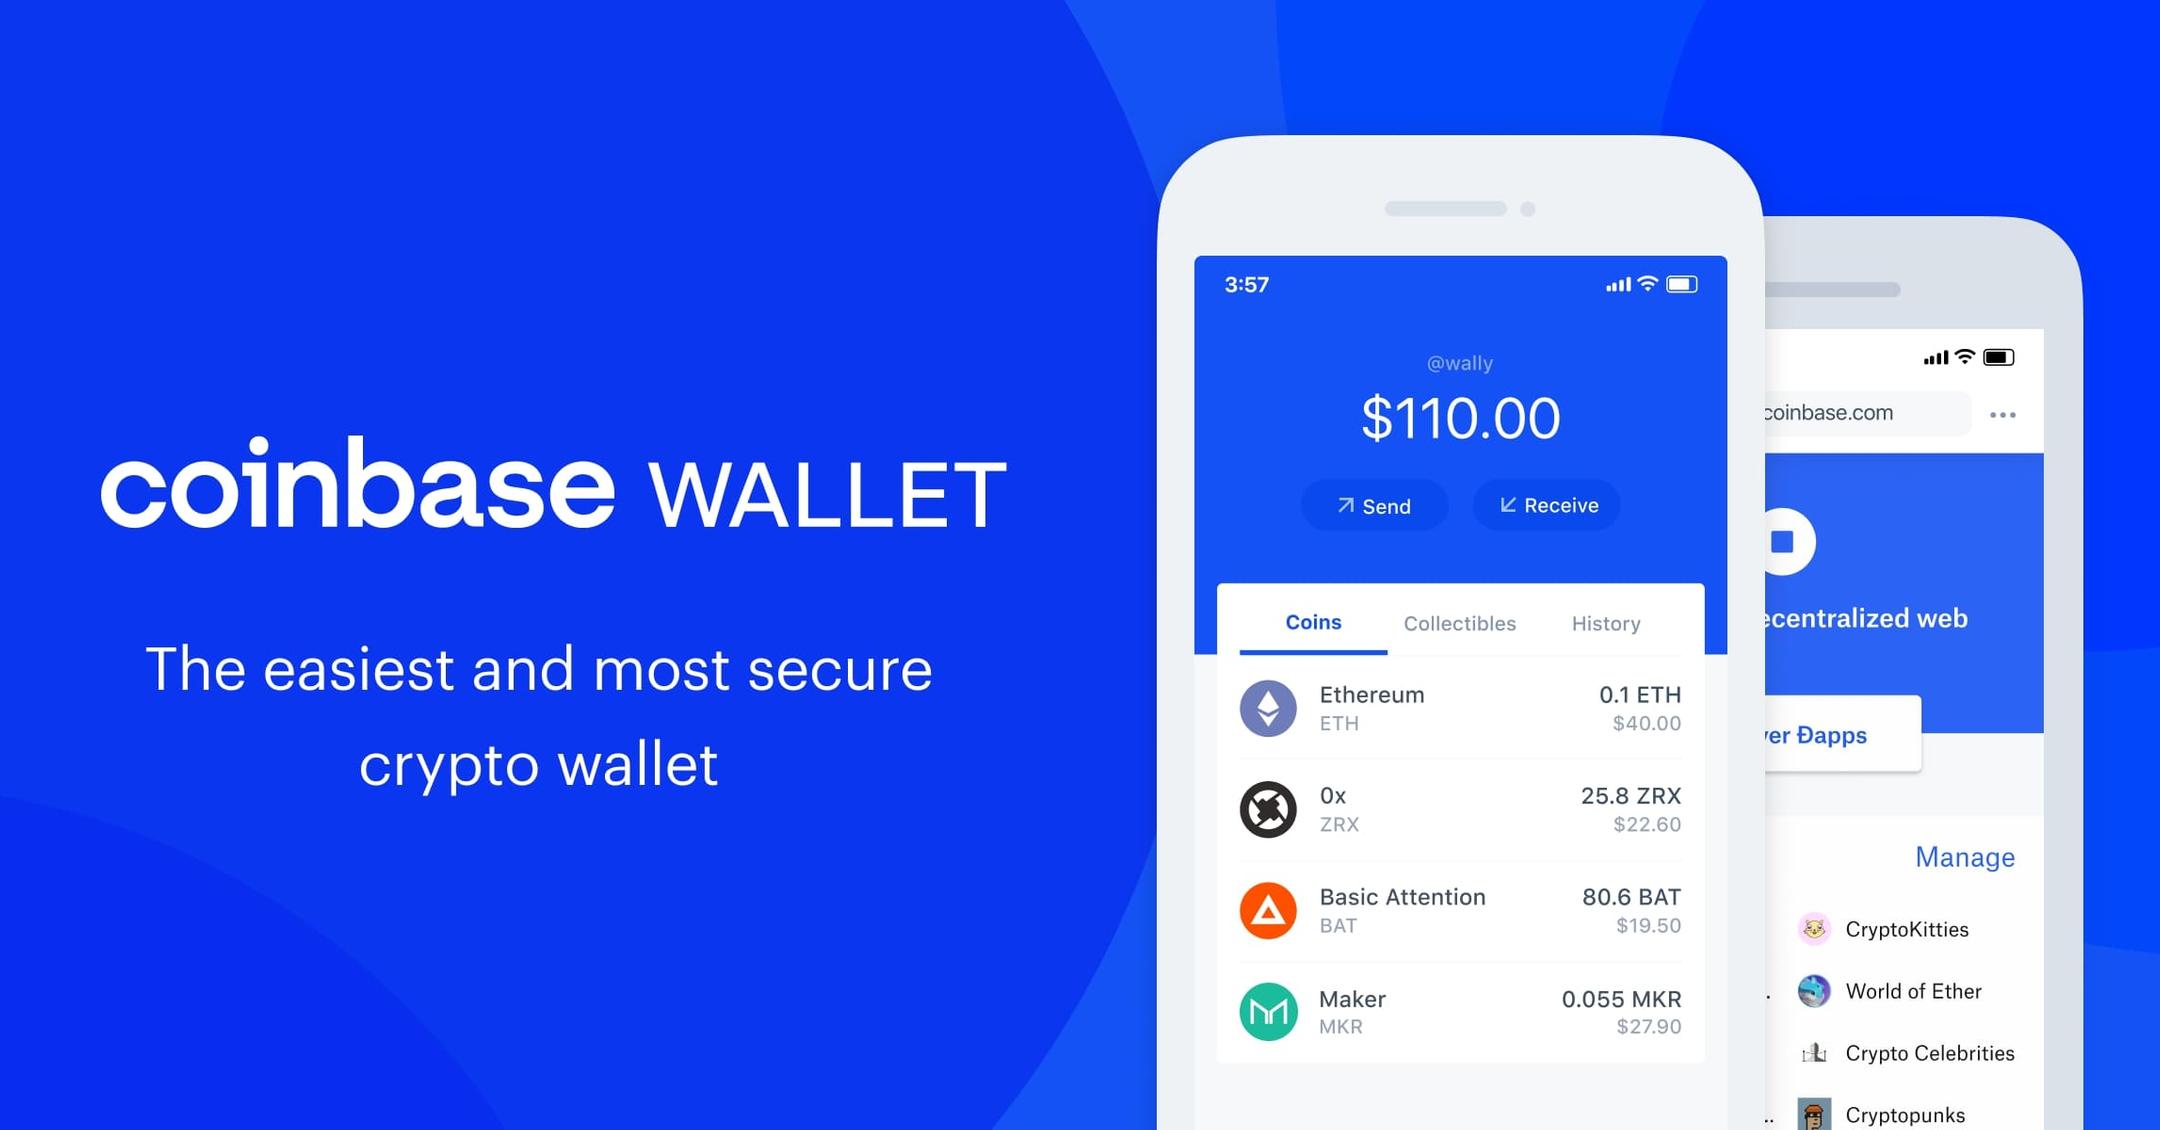 why are mining fees so high on coinbase wallet